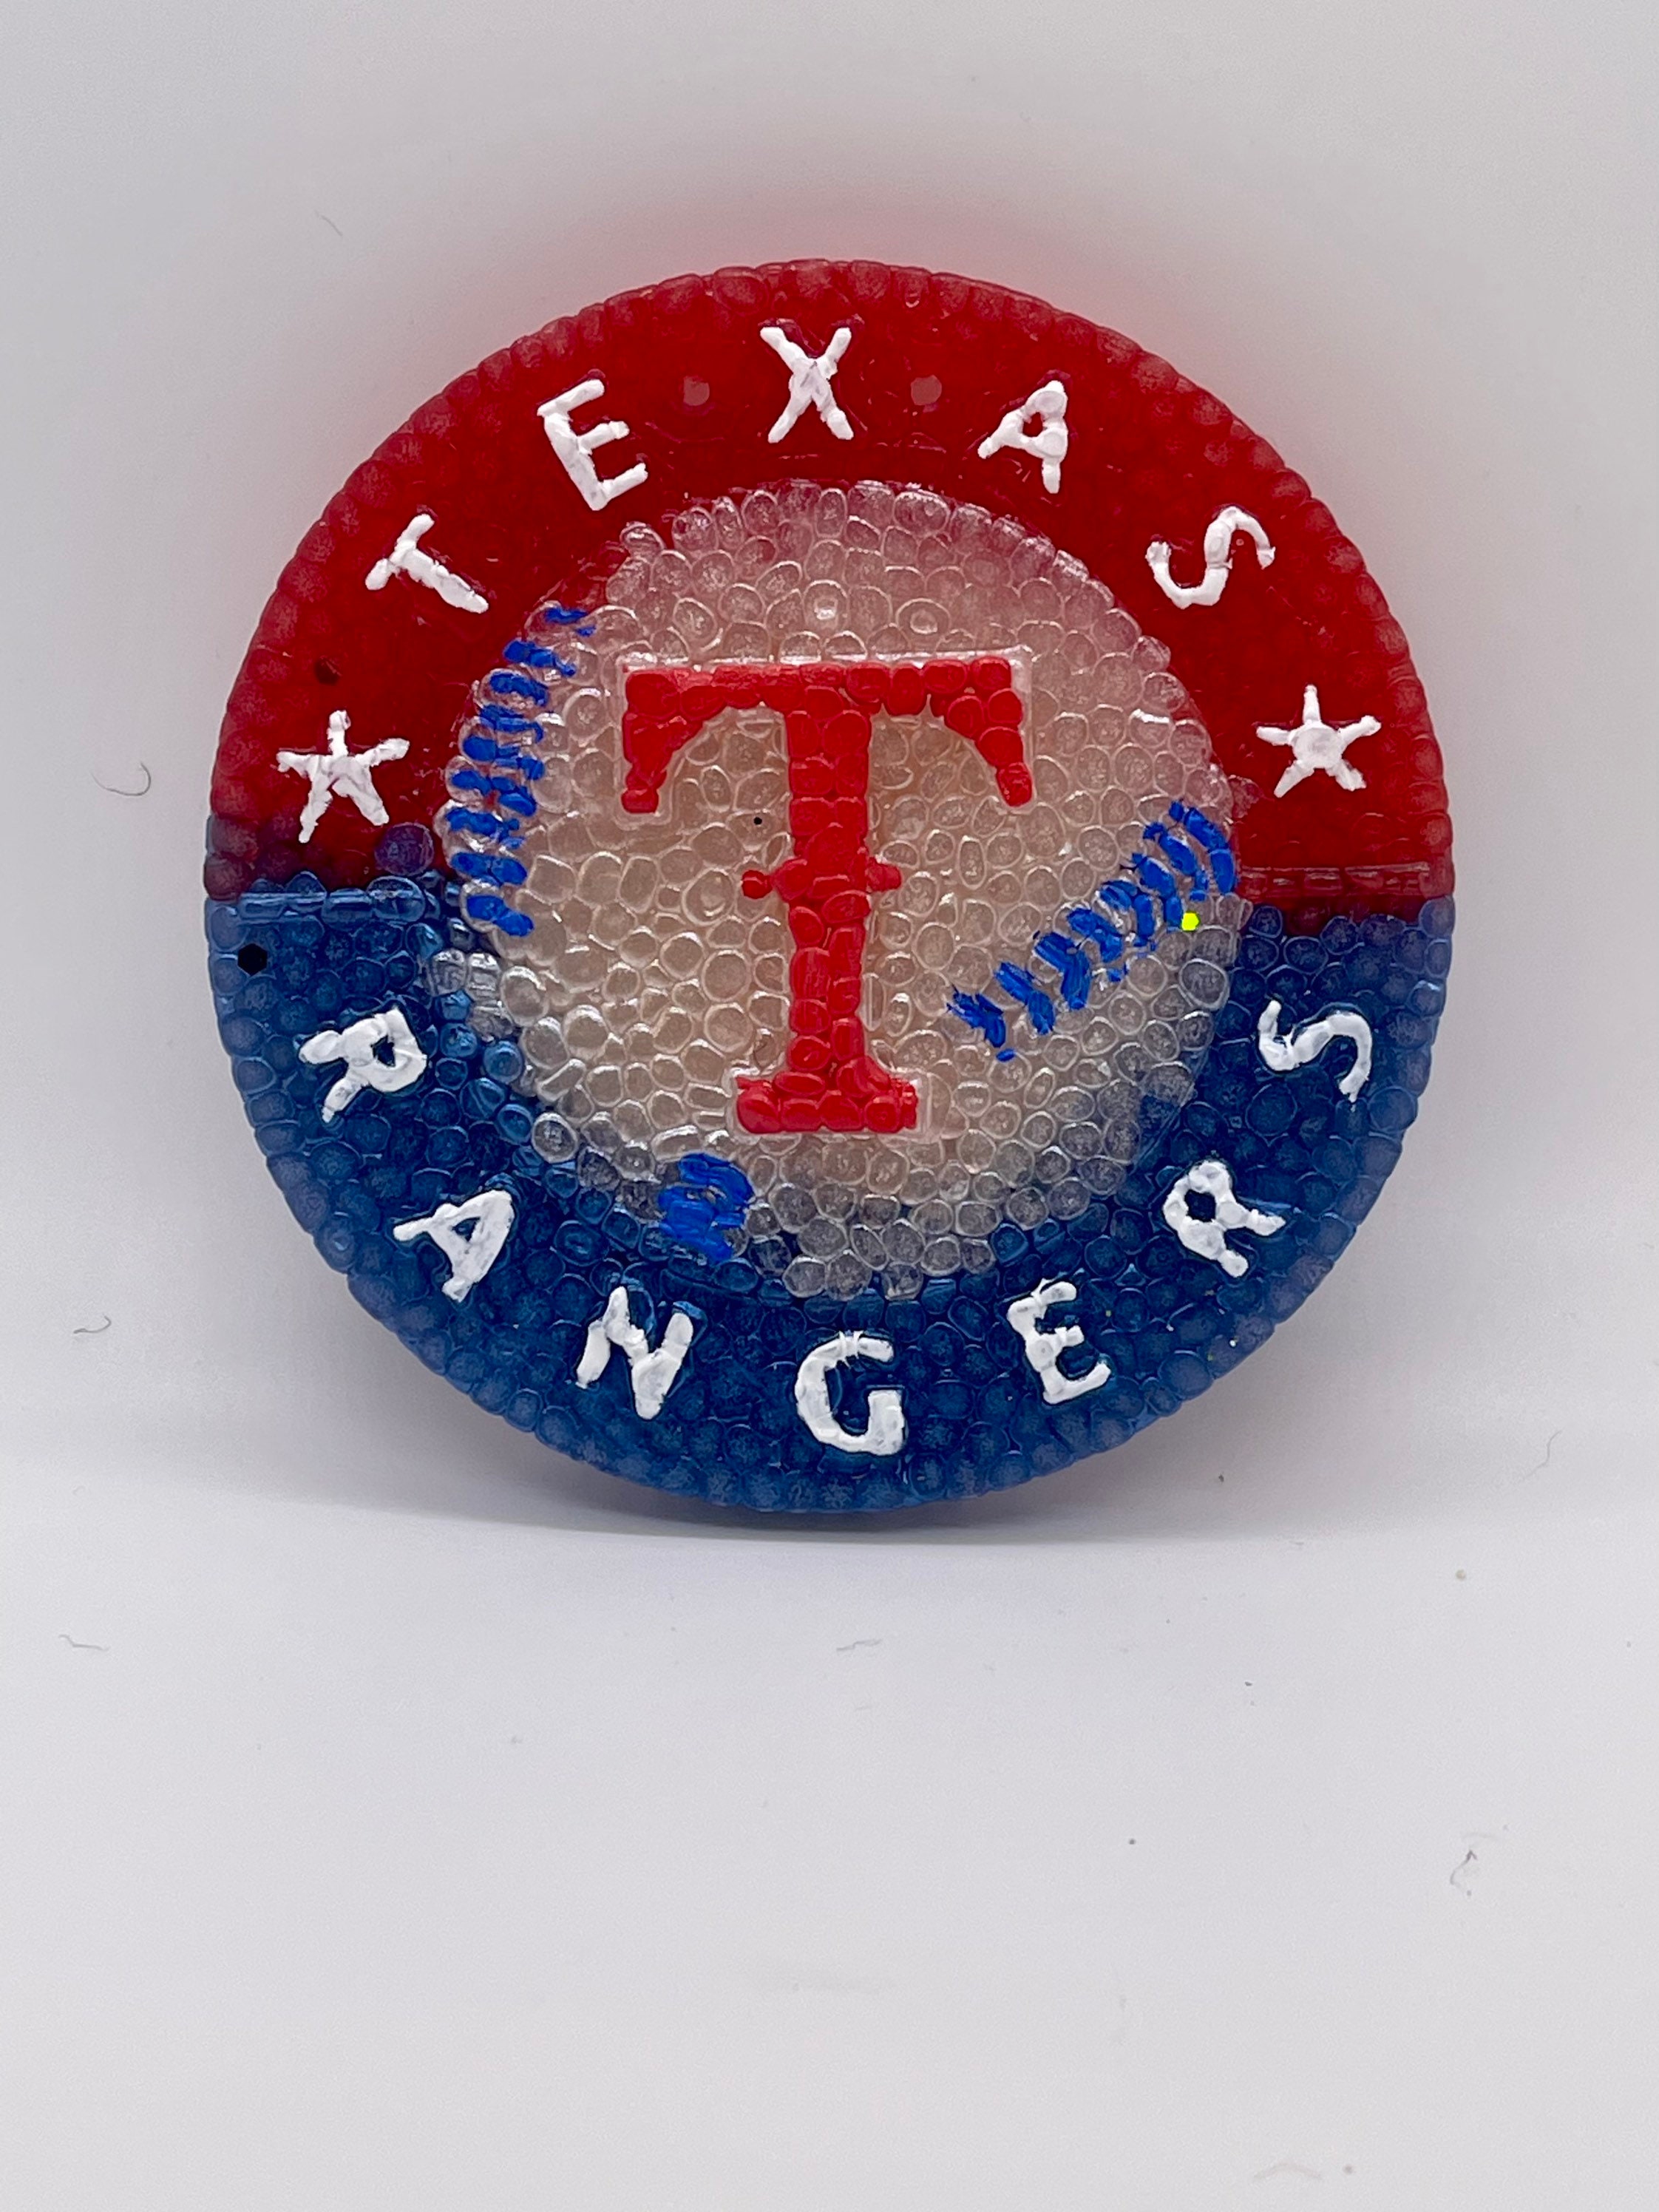 Men's Texas Rangers Texas State Patch Custom Jersey - All Stitched - Vgear